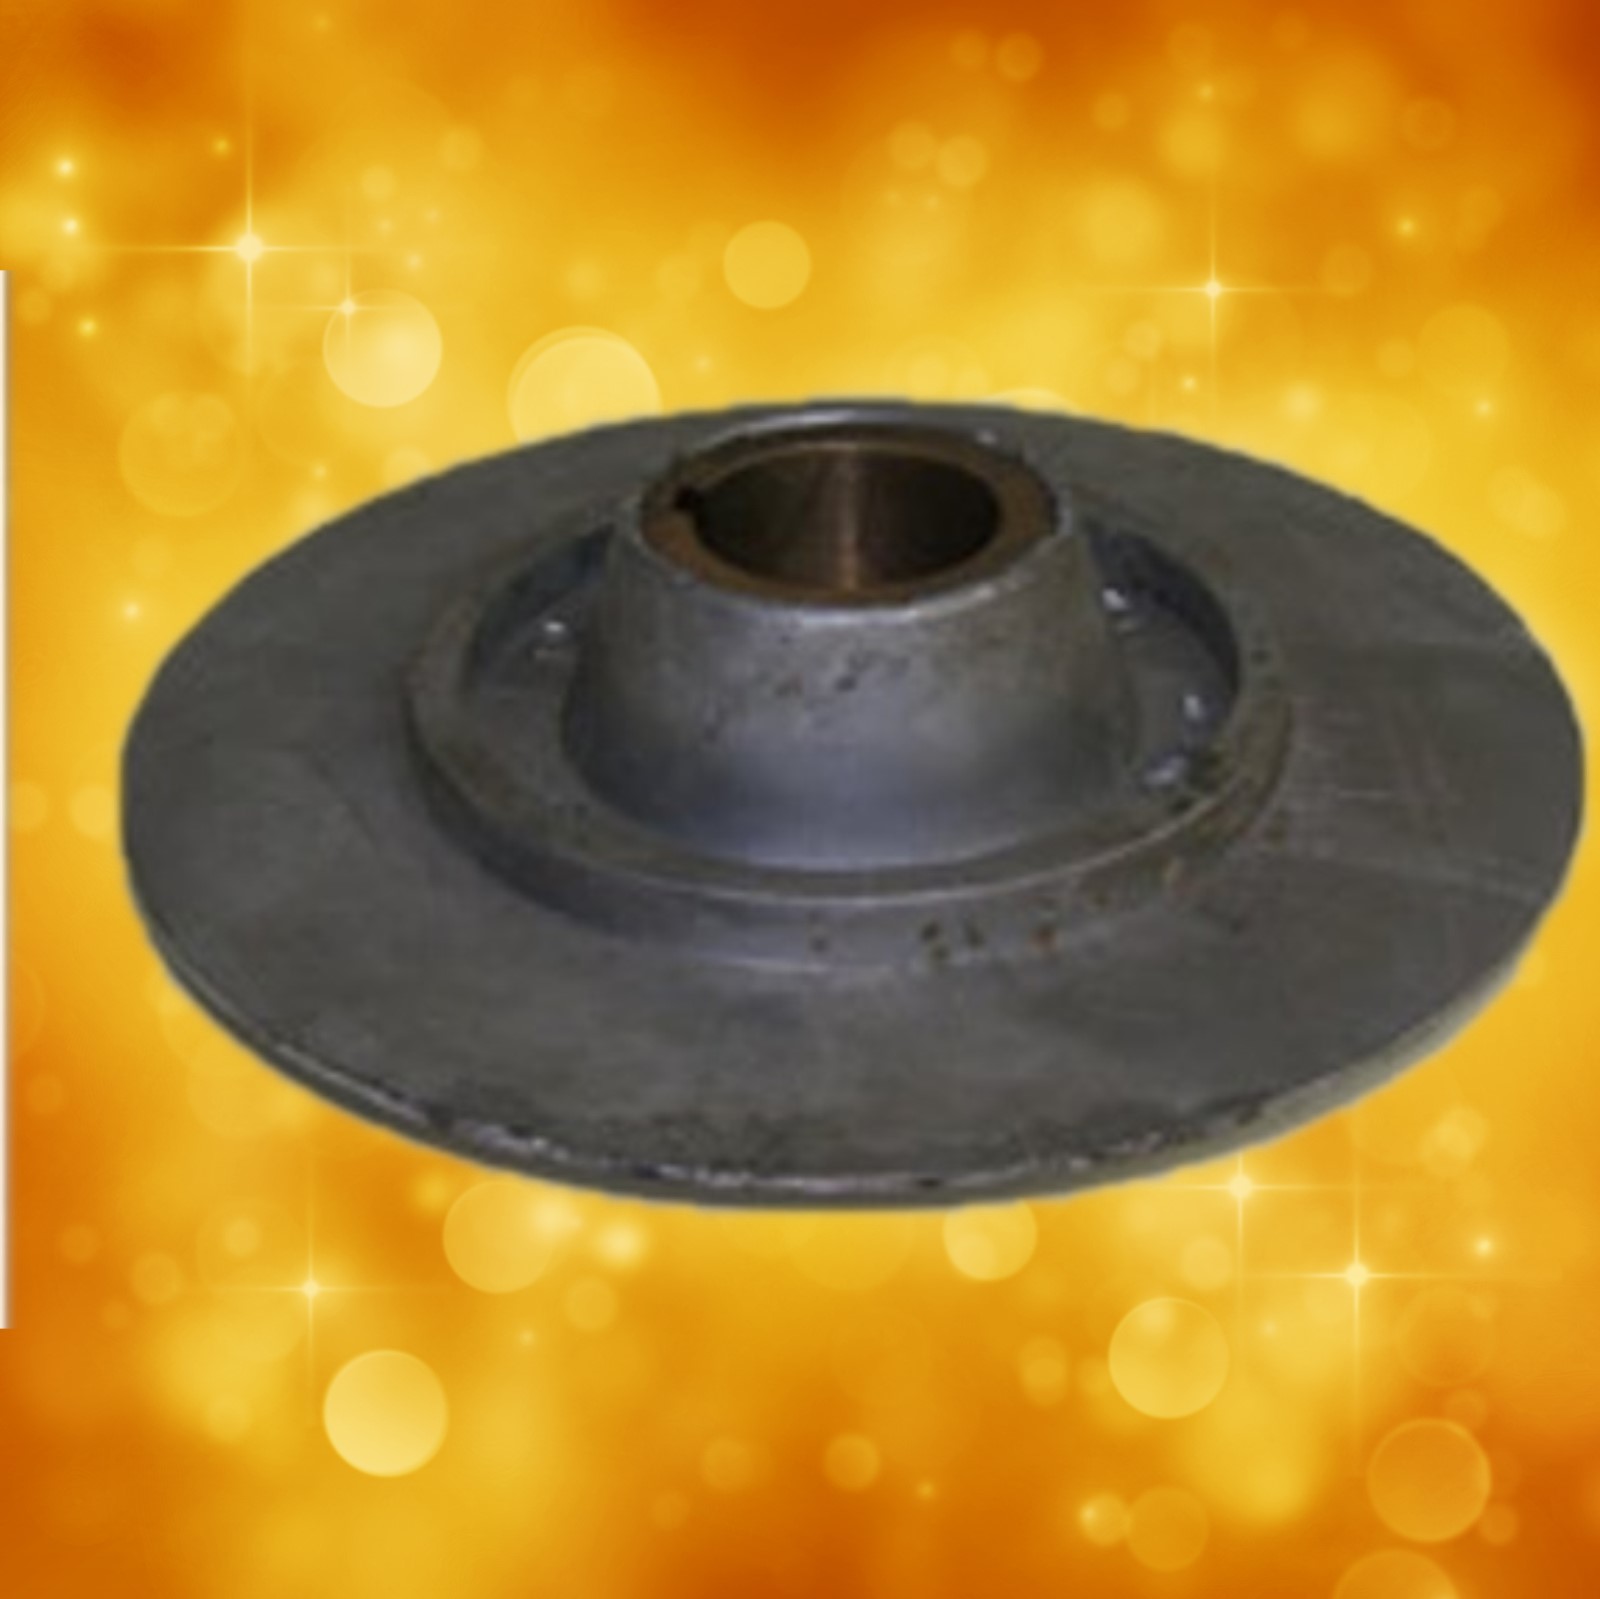 Delta Tool Part 434-08-430-0005 Delta Large Pulley 434-08-430-0005